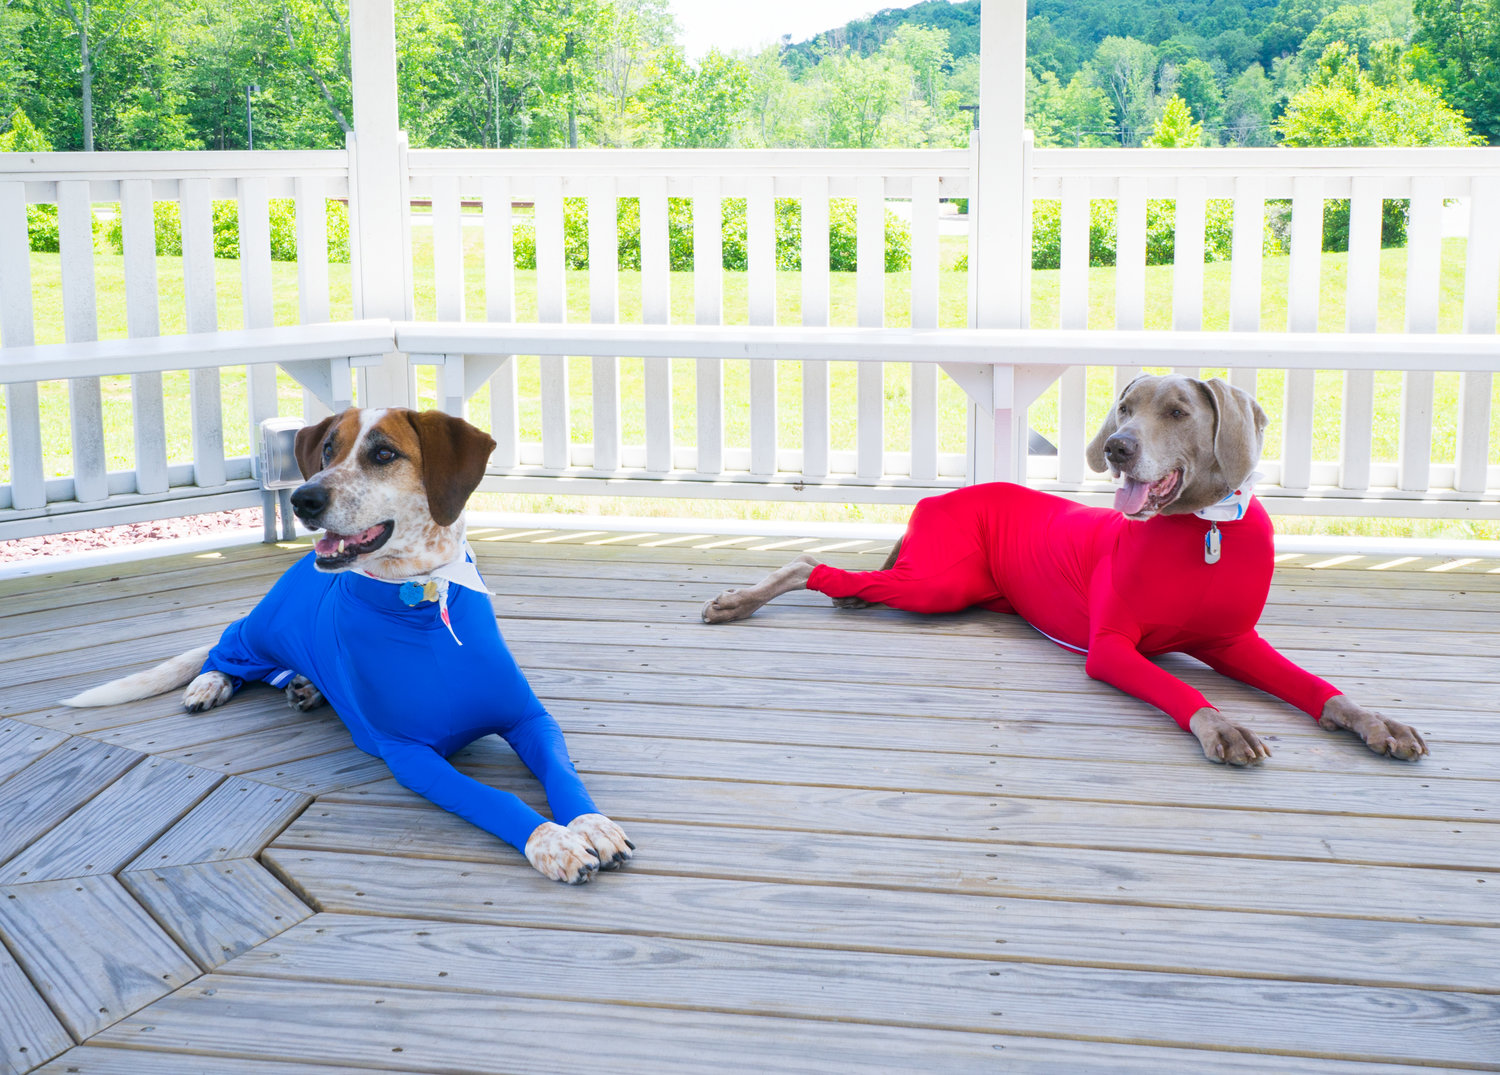 the-shed-defender-70k-per-month-selling-onesies-for-dogs